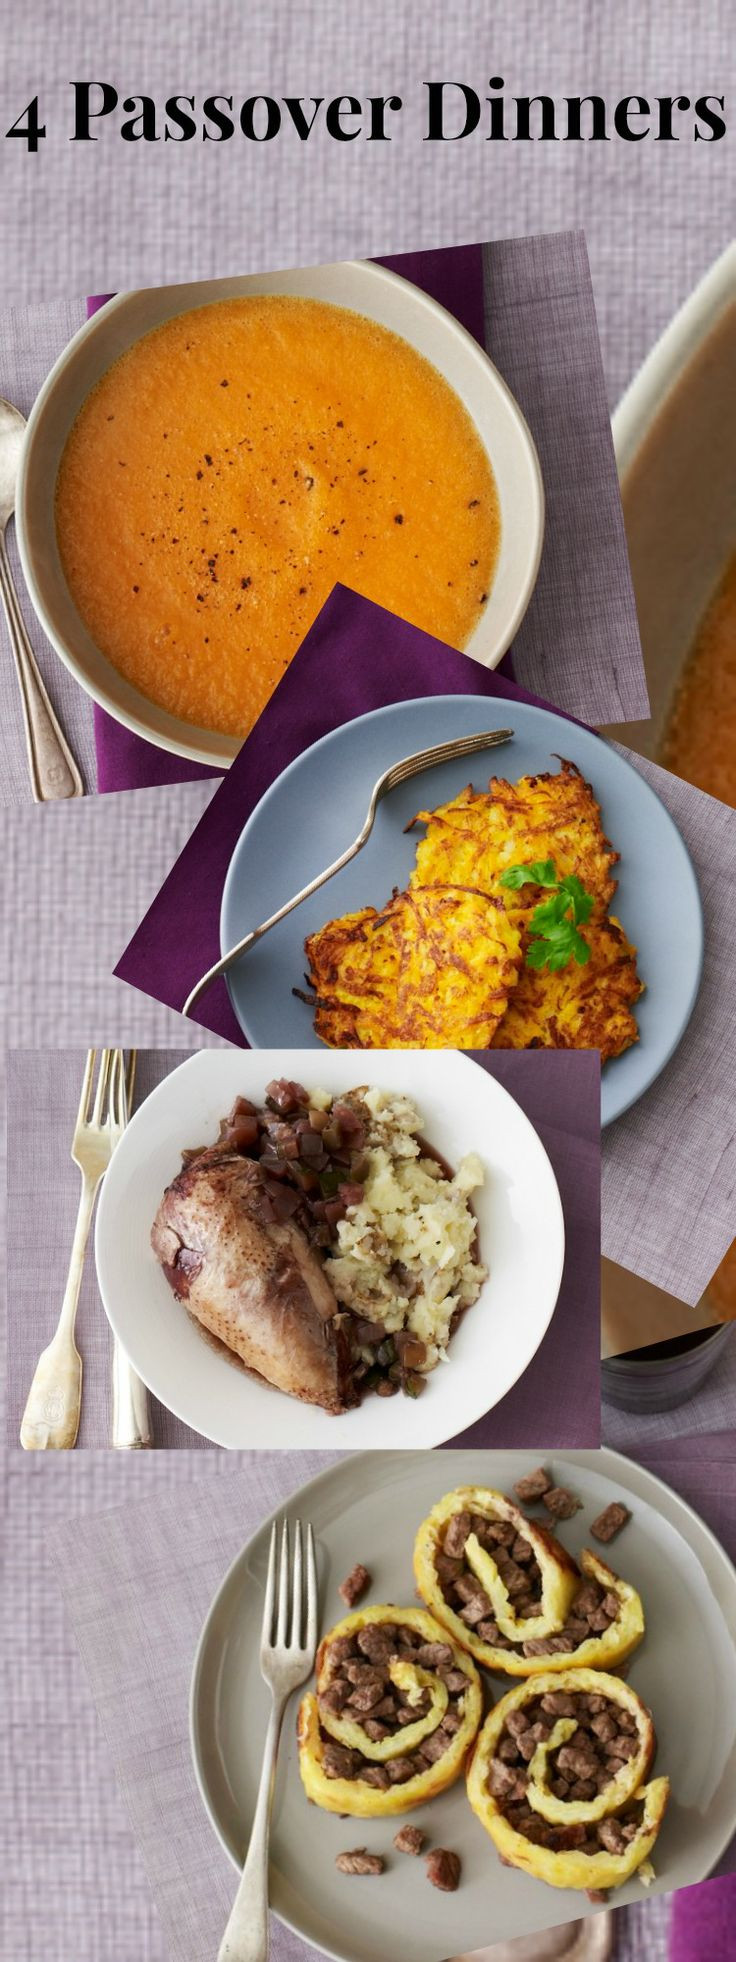 Passover Lunch Ideas
 The 25 best Passover meal ideas on Pinterest